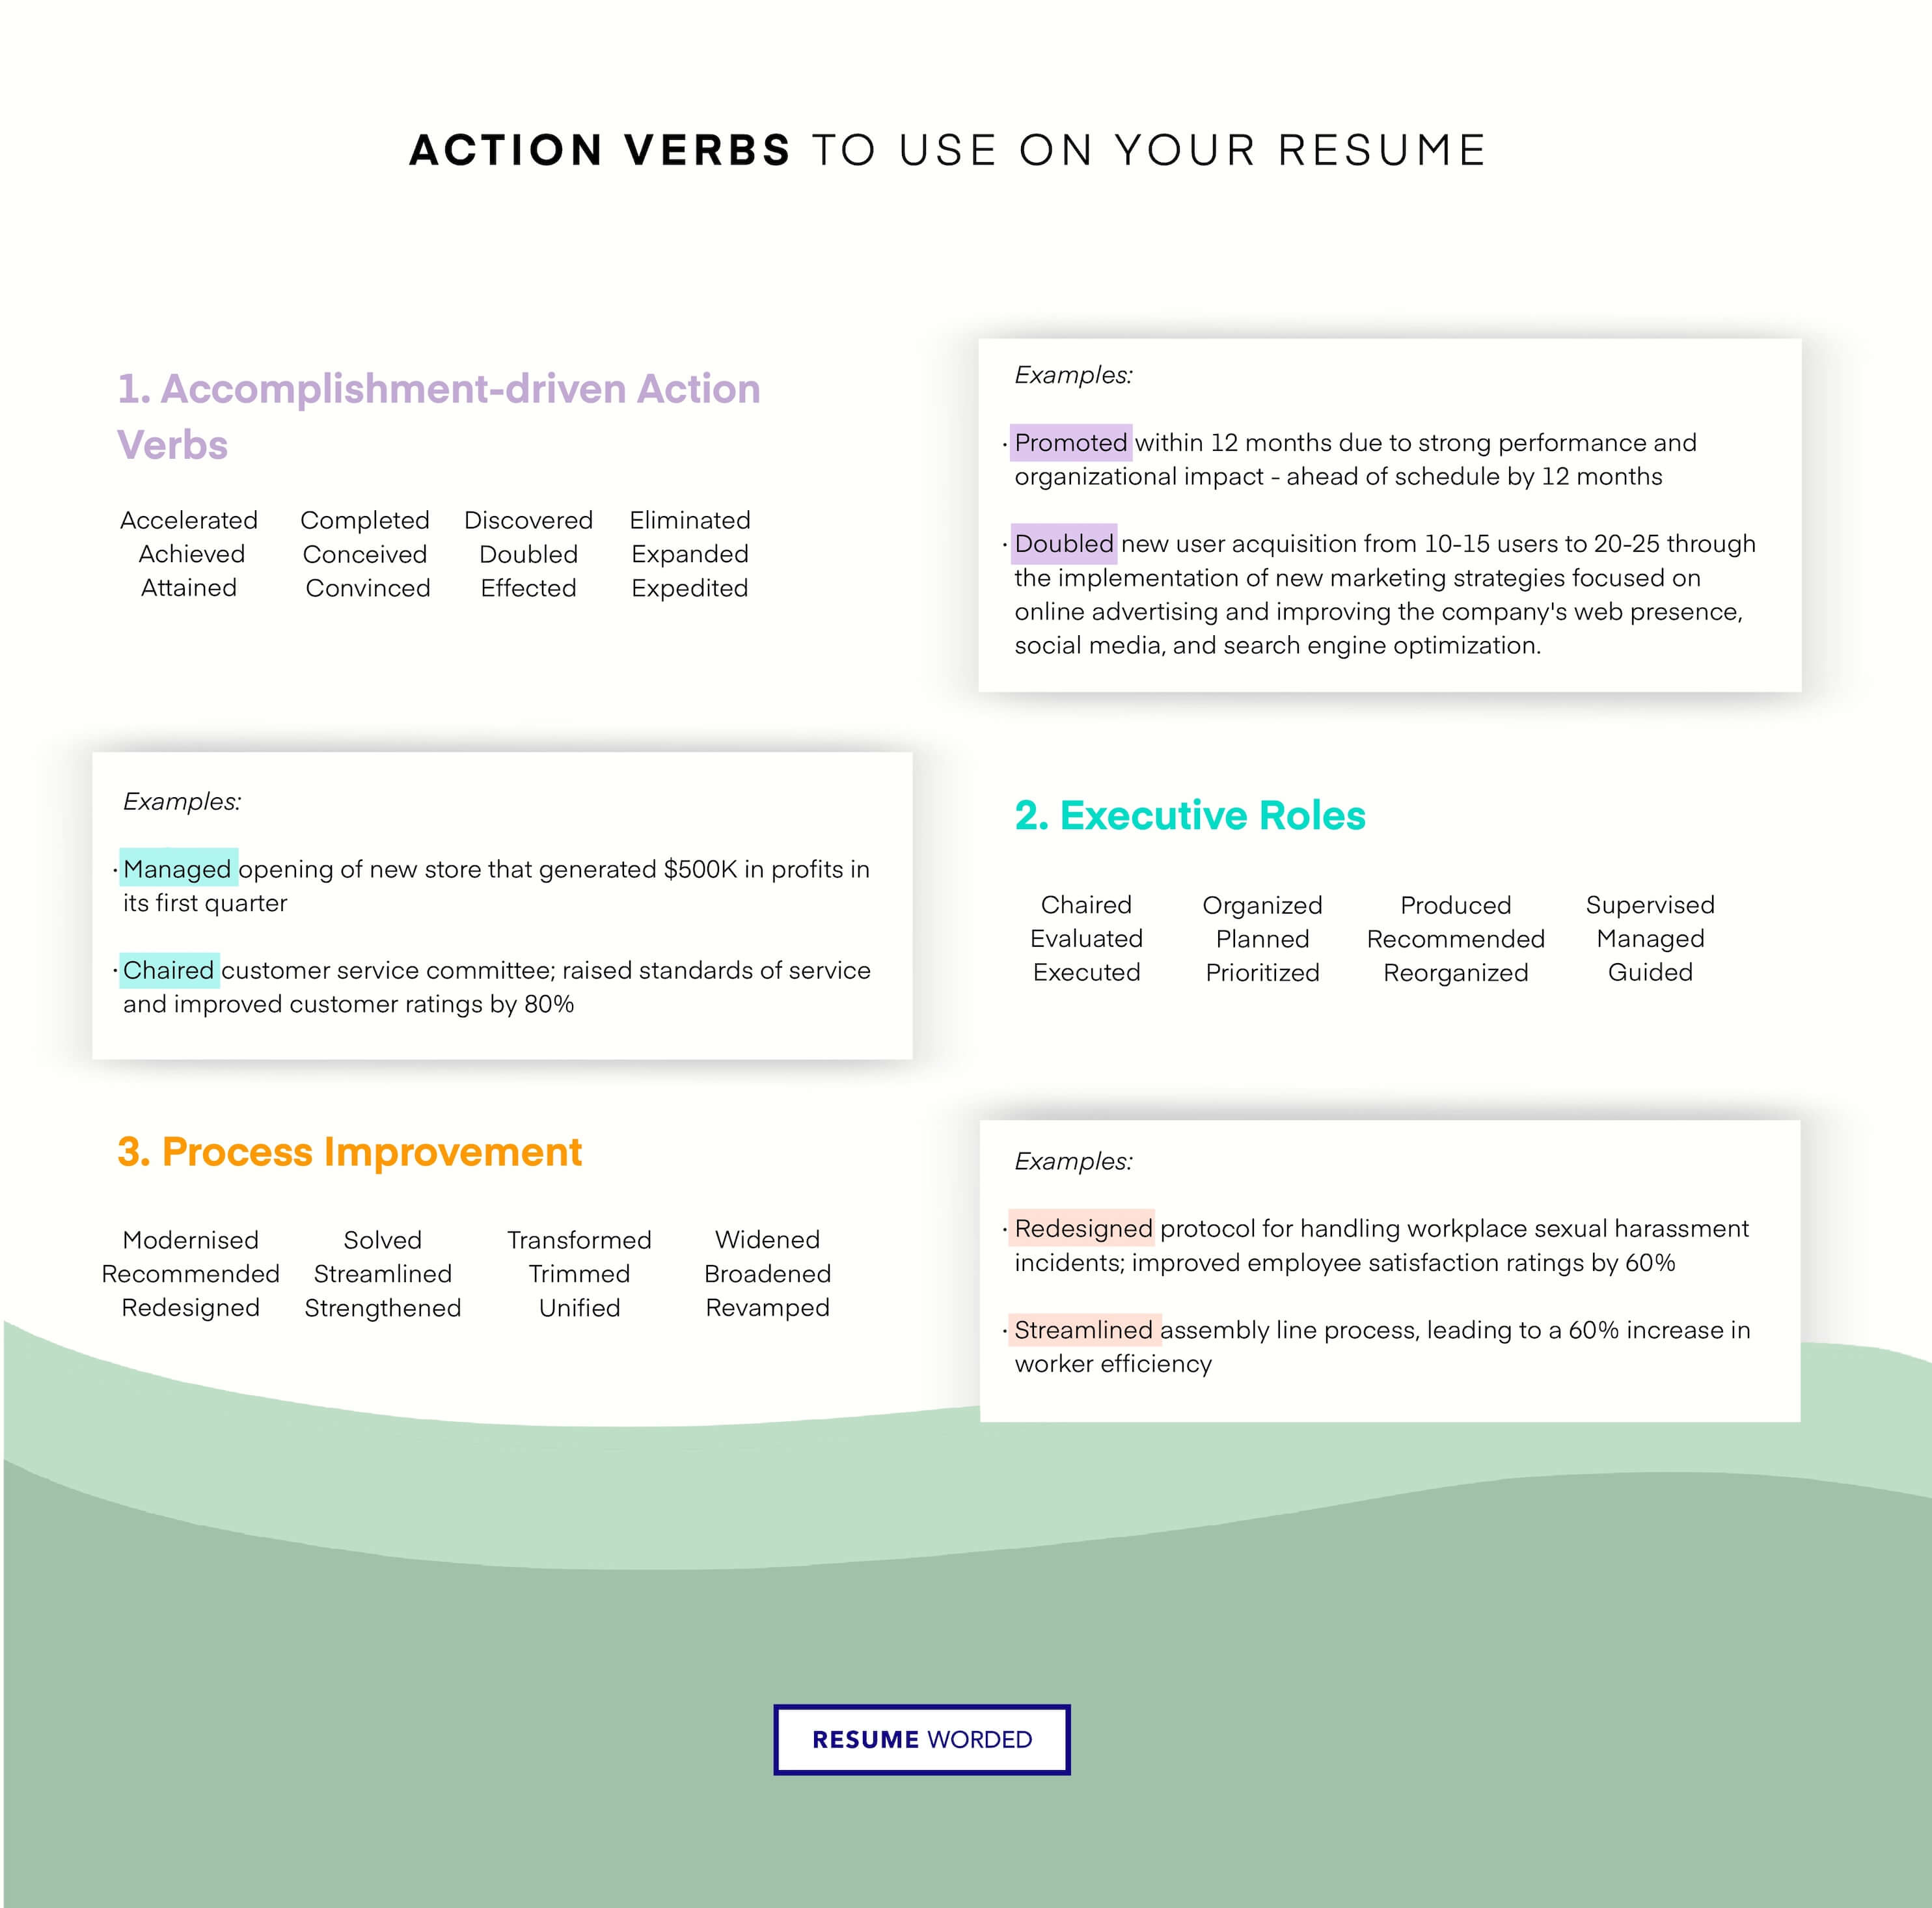 Use strong action verbs. - Purchasing Manager Resume